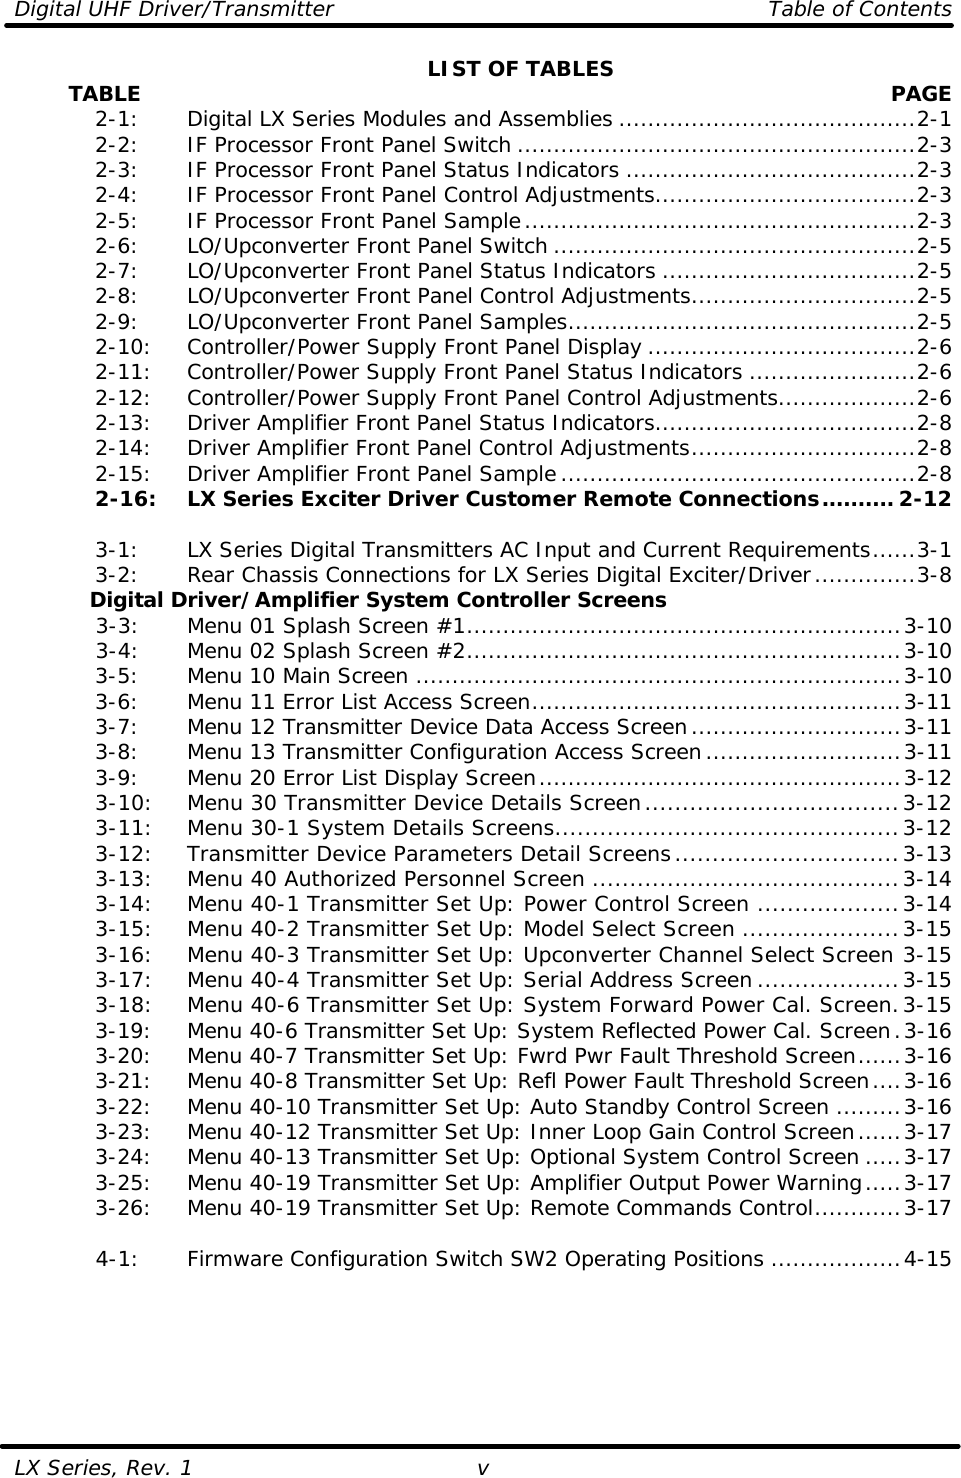 Digital UHF Driver/Transmitter    Table of Contents  LX Series, Rev. 1 v LIST OF TABLES         TABLE  PAGE  2-1:   Digital LX Series Modules and Assemblies .........................................2-1  2-2:   IF Processor Front Panel Switch .......................................................2-3  2-3:   IF Processor Front Panel Status Indicators ........................................2-3  2-4:   IF Processor Front Panel Control Adjustments....................................2-3  2-5:   IF Processor Front Panel Sample......................................................2-3  2-6:   LO/Upconverter Front Panel Switch ..................................................2-5  2-7:   LO/Upconverter Front Panel Status Indicators ...................................2-5  2-8:   LO/Upconverter Front Panel Control Adjustments...............................2-5  2-9:   LO/Upconverter Front Panel Samples................................................2-5  2-10: Controller/Power Supply Front Panel Display .....................................2-6  2-11: Controller/Power Supply Front Panel Status Indicators .......................2-6  2-12: Controller/Power Supply Front Panel Control Adjustments...................2-6  2-13: Driver Amplifier Front Panel Status Indicators....................................2-8  2-14: Driver Amplifier Front Panel Control Adjustments...............................2-8  2-15: Driver Amplifier Front Panel Sample.................................................2-8  2-16: LX Series Exciter Driver Customer Remote Connections.......... 2-12   3-1:   LX Series Digital Transmitters AC Input and Current Requirements......3-1  3-2:   Rear Chassis Connections for LX Series Digital Exciter/Driver..............3-8 Digital Driver/Amplifier System Controller Screens  3-3:   Menu 01 Splash Screen #1............................................................3-10  3-4:   Menu 02 Splash Screen #2............................................................3-10  3-5:   Menu 10 Main Screen ...................................................................3-10  3-6:   Menu 11 Error List Access Screen...................................................3-11  3-7:   Menu 12 Transmitter Device Data Access Screen.............................3-11  3-8:   Menu 13 Transmitter Configuration Access Screen...........................3-11  3-9:   Menu 20 Error List Display Screen..................................................3-12  3-10: Menu 30 Transmitter Device Details Screen..................................3-12  3-11: Menu 30-1 System Details Screens..............................................3-12  3-12: Transmitter Device Parameters Detail Screens..............................3-13  3-13: Menu 40 Authorized Personnel Screen .........................................3-14  3-14: Menu 40-1 Transmitter Set Up: Power Control Screen ...................3-14  3-15: Menu 40-2 Transmitter Set Up: Model Select Screen .....................3-15  3-16: Menu 40-3 Transmitter Set Up: Upconverter Channel Select Screen 3-15  3-17: Menu 40-4 Transmitter Set Up: Serial Address Screen ...................3-15  3-18: Menu 40-6 Transmitter Set Up: System Forward Power Cal. Screen.3-15  3-19: Menu 40-6 Transmitter Set Up: System Reflected Power Cal. Screen.3-16  3-20: Menu 40-7 Transmitter Set Up: Fwrd Pwr Fault Threshold Screen......3-16  3-21: Menu 40-8 Transmitter Set Up: Refl Power Fault Threshold Screen....3-16  3-22: Menu 40-10 Transmitter Set Up: Auto Standby Control Screen .........3-16  3-23: Menu 40-12 Transmitter Set Up: Inner Loop Gain Control Screen......3-17  3-24: Menu 40-13 Transmitter Set Up: Optional System Control Screen .....3-17  3-25: Menu 40-19 Transmitter Set Up: Amplifier Output Power Warning.....3-17  3-26: Menu 40-19 Transmitter Set Up: Remote Commands Control............3-17   4-1:   Firmware Configuration Switch SW2 Operating Positions ..................4-15  